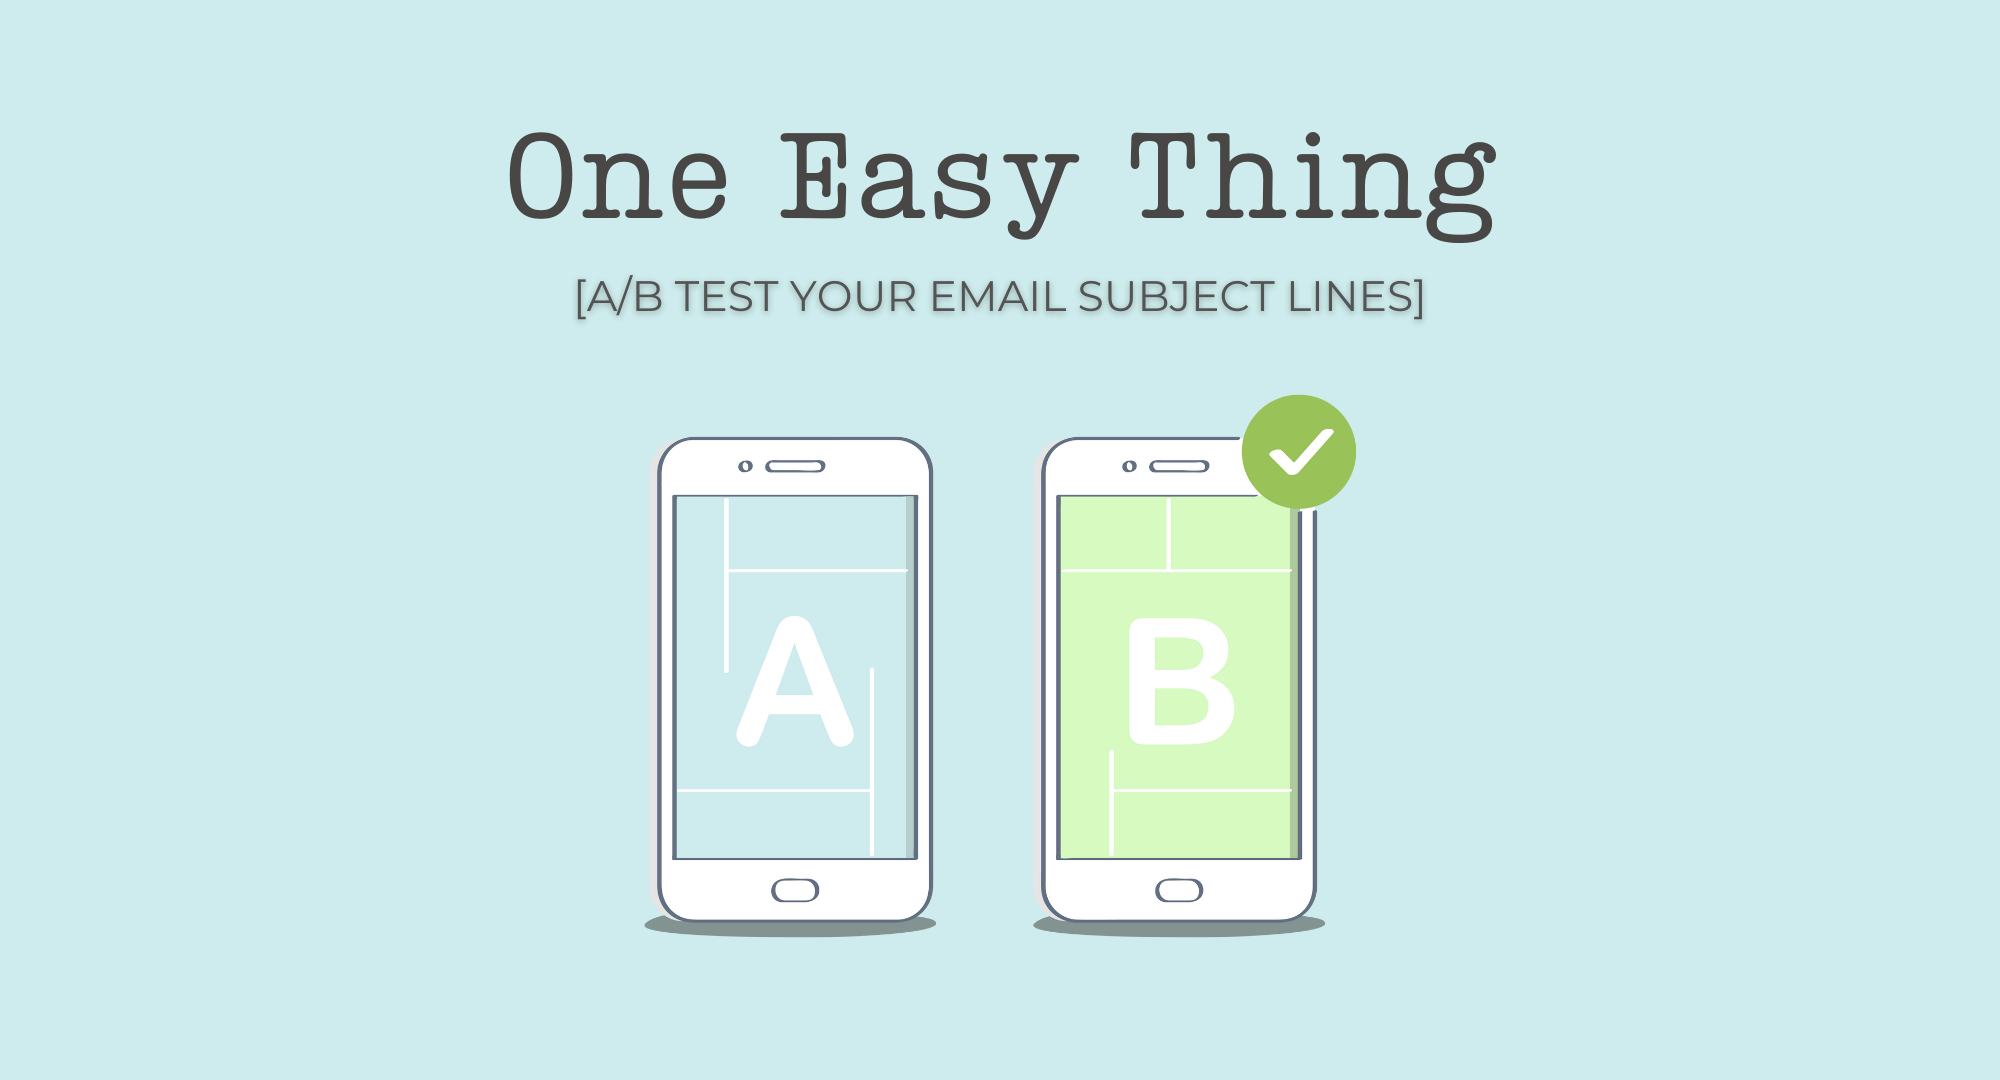 ONE EASY THING: A/B test your email subject lines